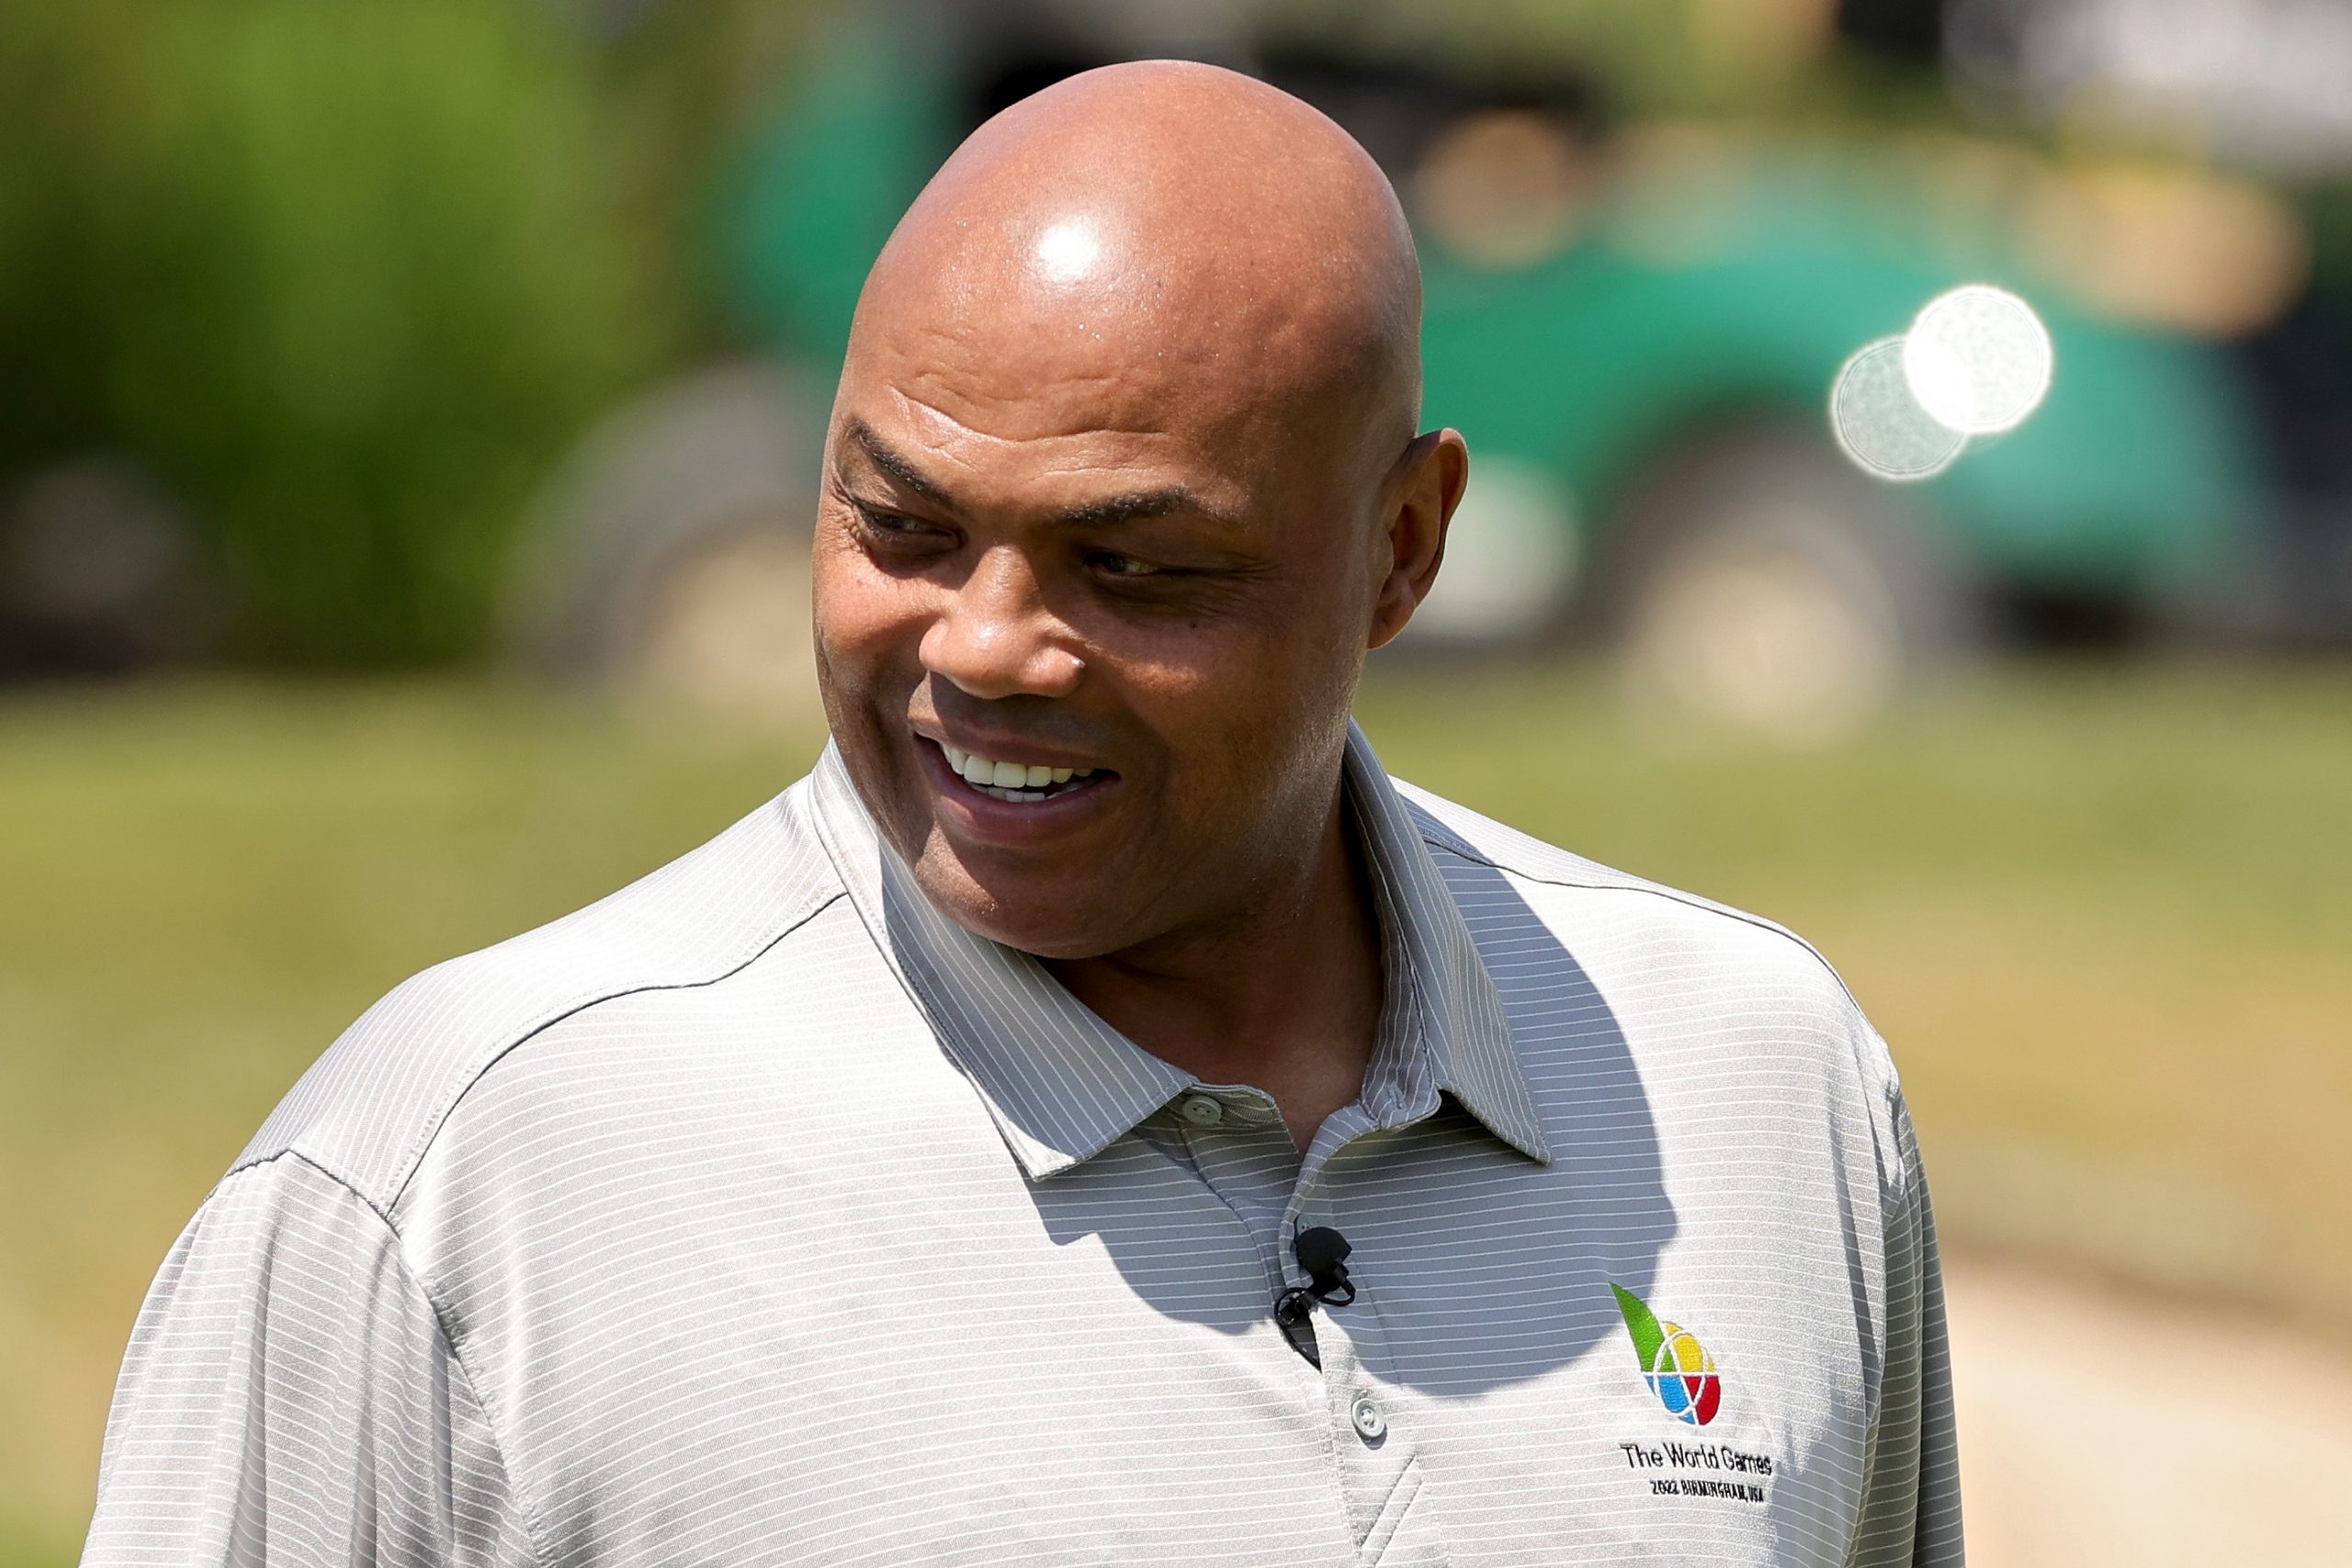 Charles Barkley looks on during Capital One's The Match.